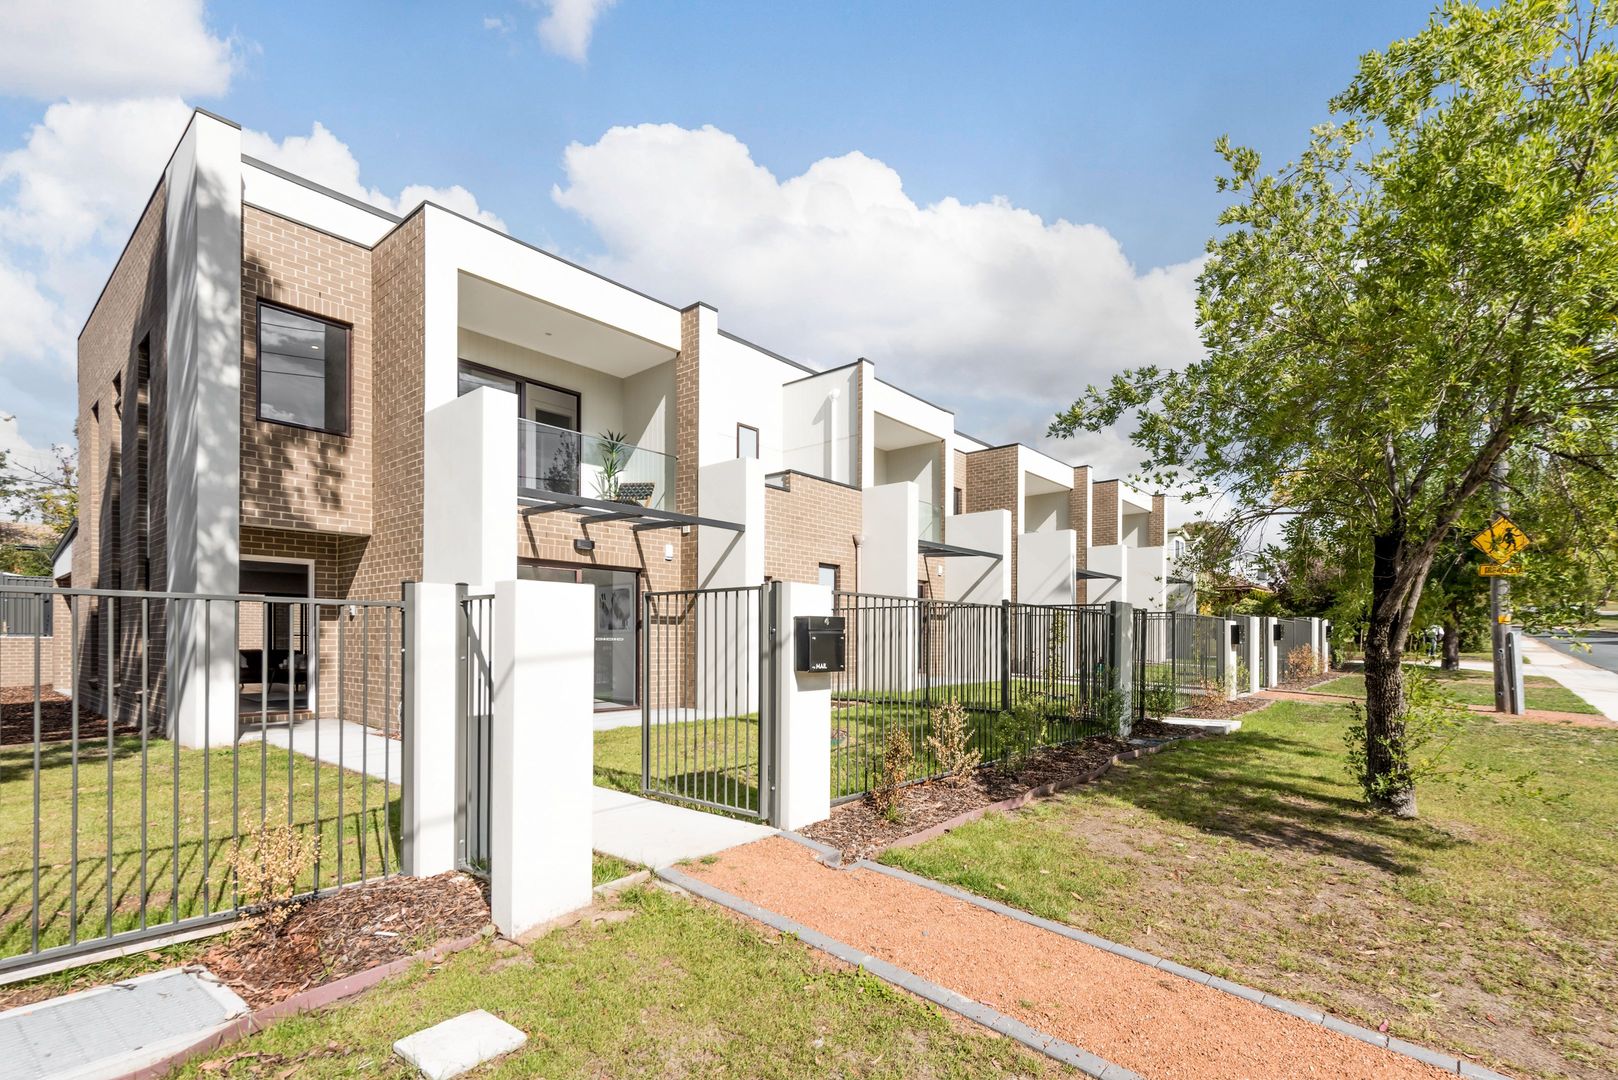 47-49 Maclaurin Crescent, Chifley ACT 2606, Image 1